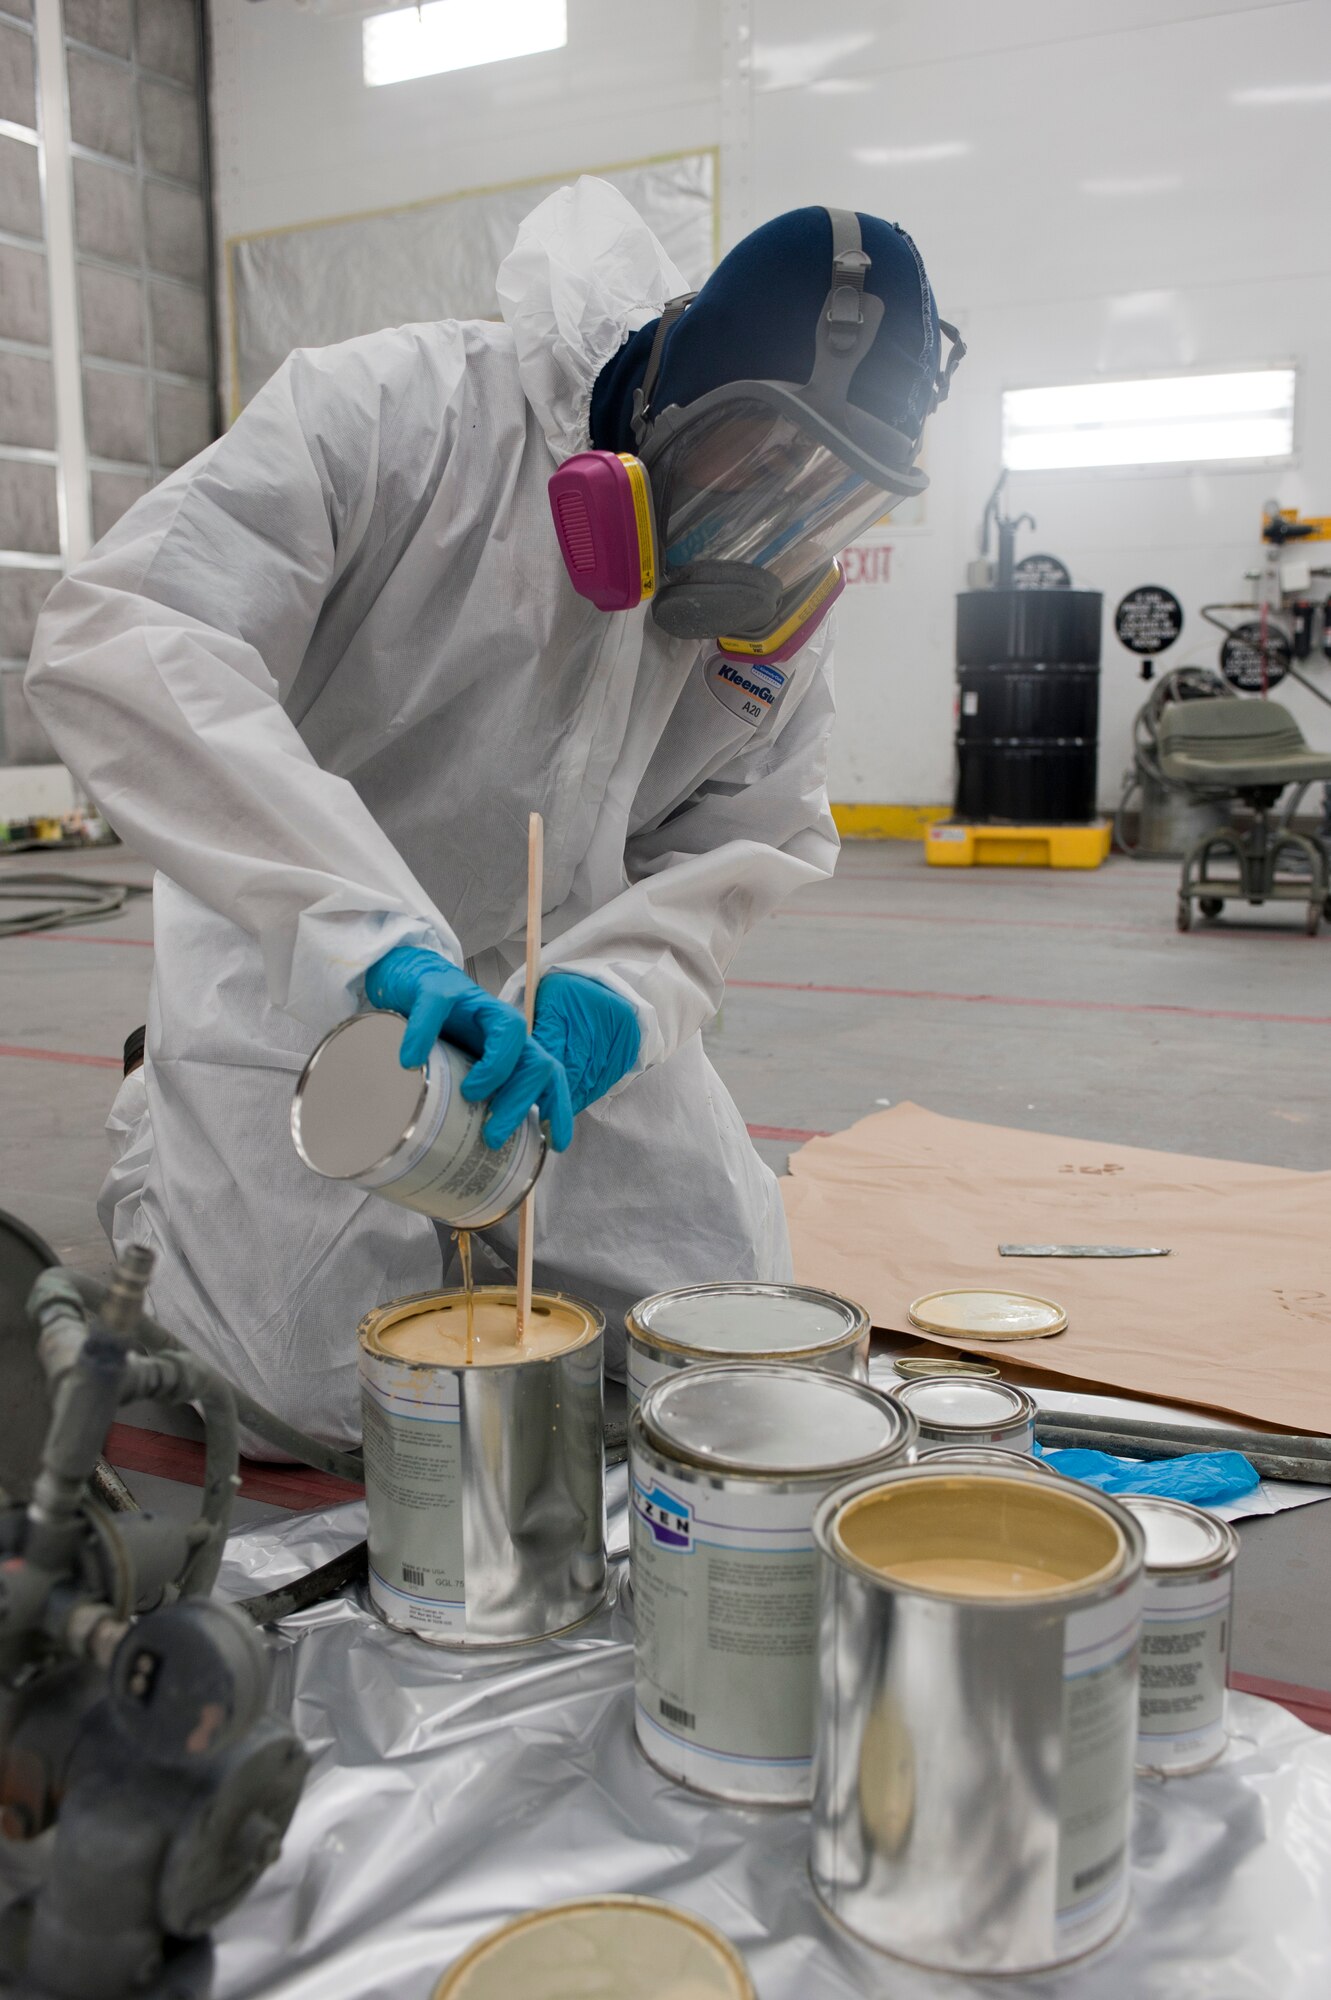 Jamaul Cherry, 57th Maintenance Group Corrosion shop aircraft painter, prepares primer to be sprayed onto an F-16 Fighting Falcon inside a temperature-controlled building on Nellis Air Force Base, Nev., Sept. 9, 2015. Before spraying an aircraft, painters ensure parts that don’t require paint or can’t be painted are masked off. (U.S. Air Force photo by Airman 1st Class Mikaley Kline)